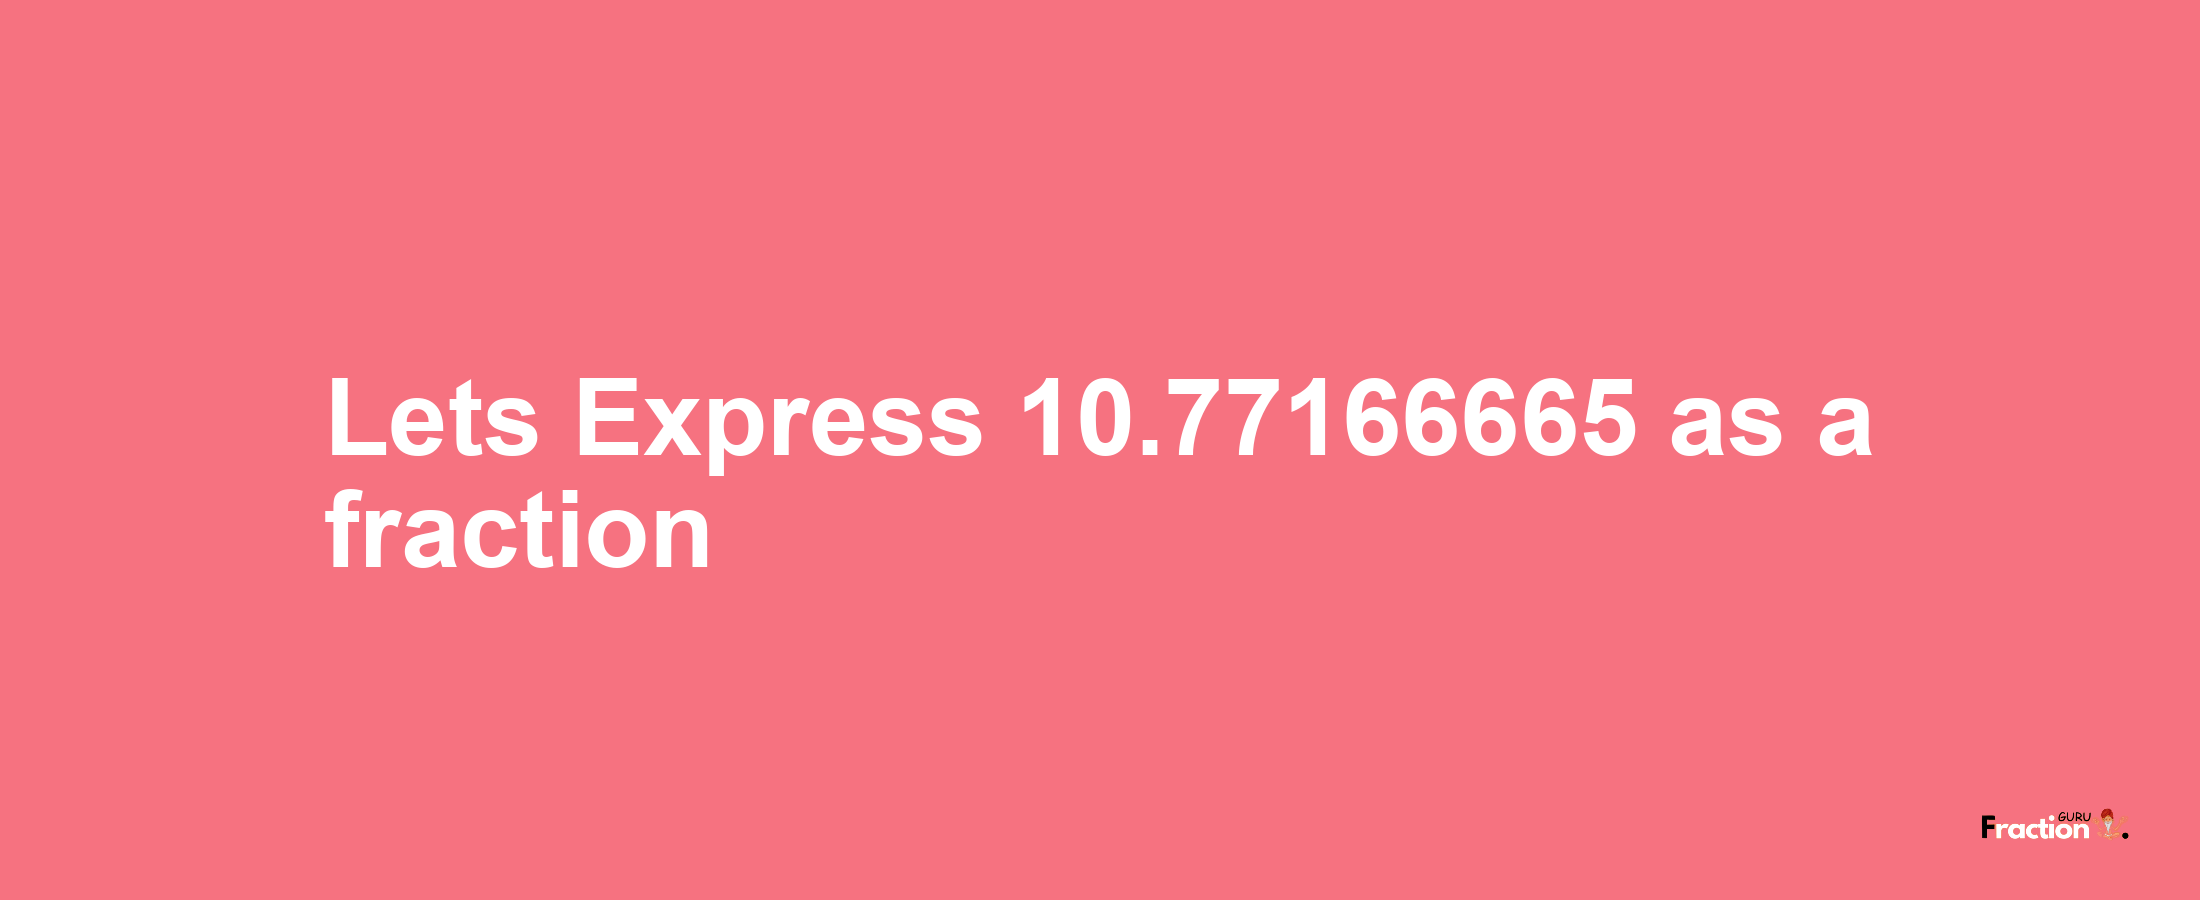 Lets Express 10.77166665 as afraction